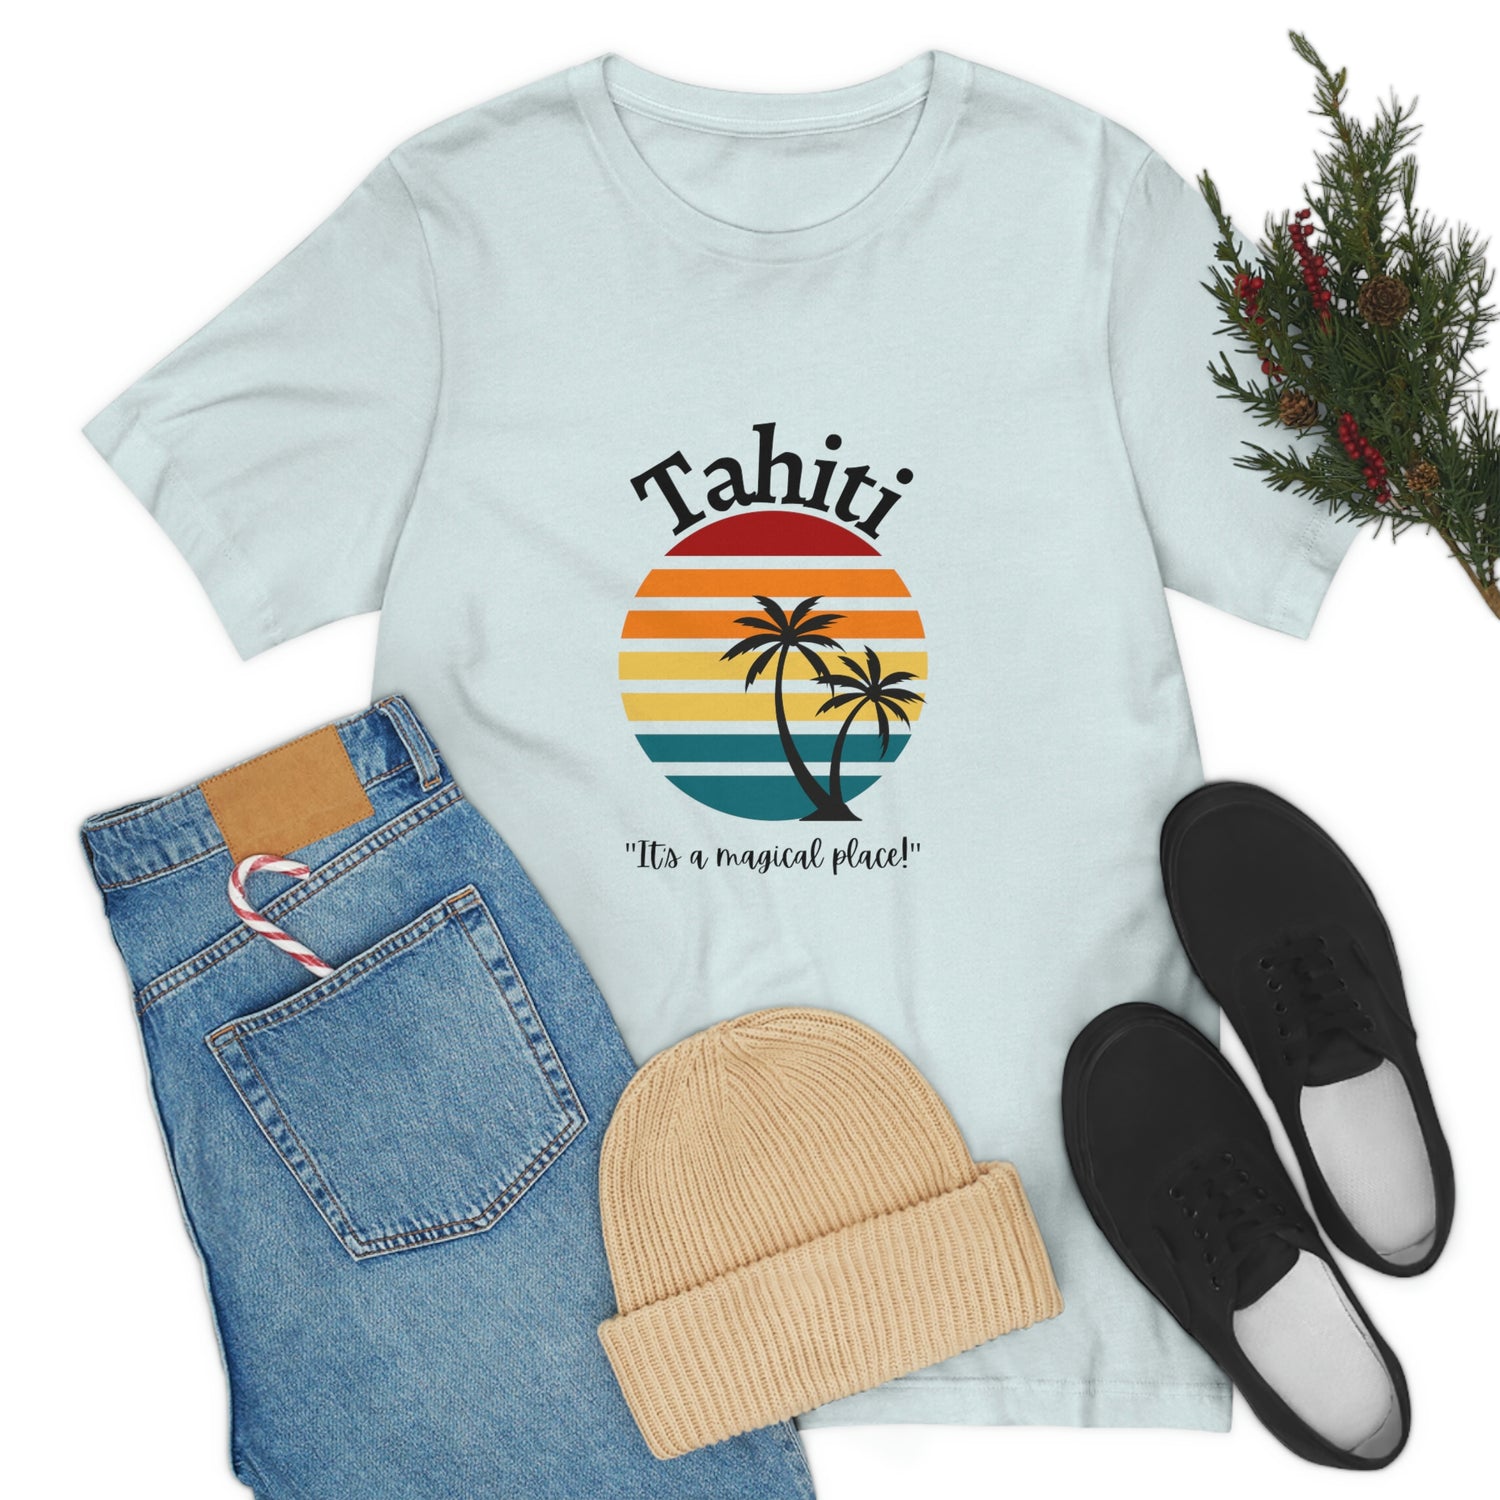 Agents of Shield Inspired Tahiti, its a magical place Shirt Lord and Lady Towers